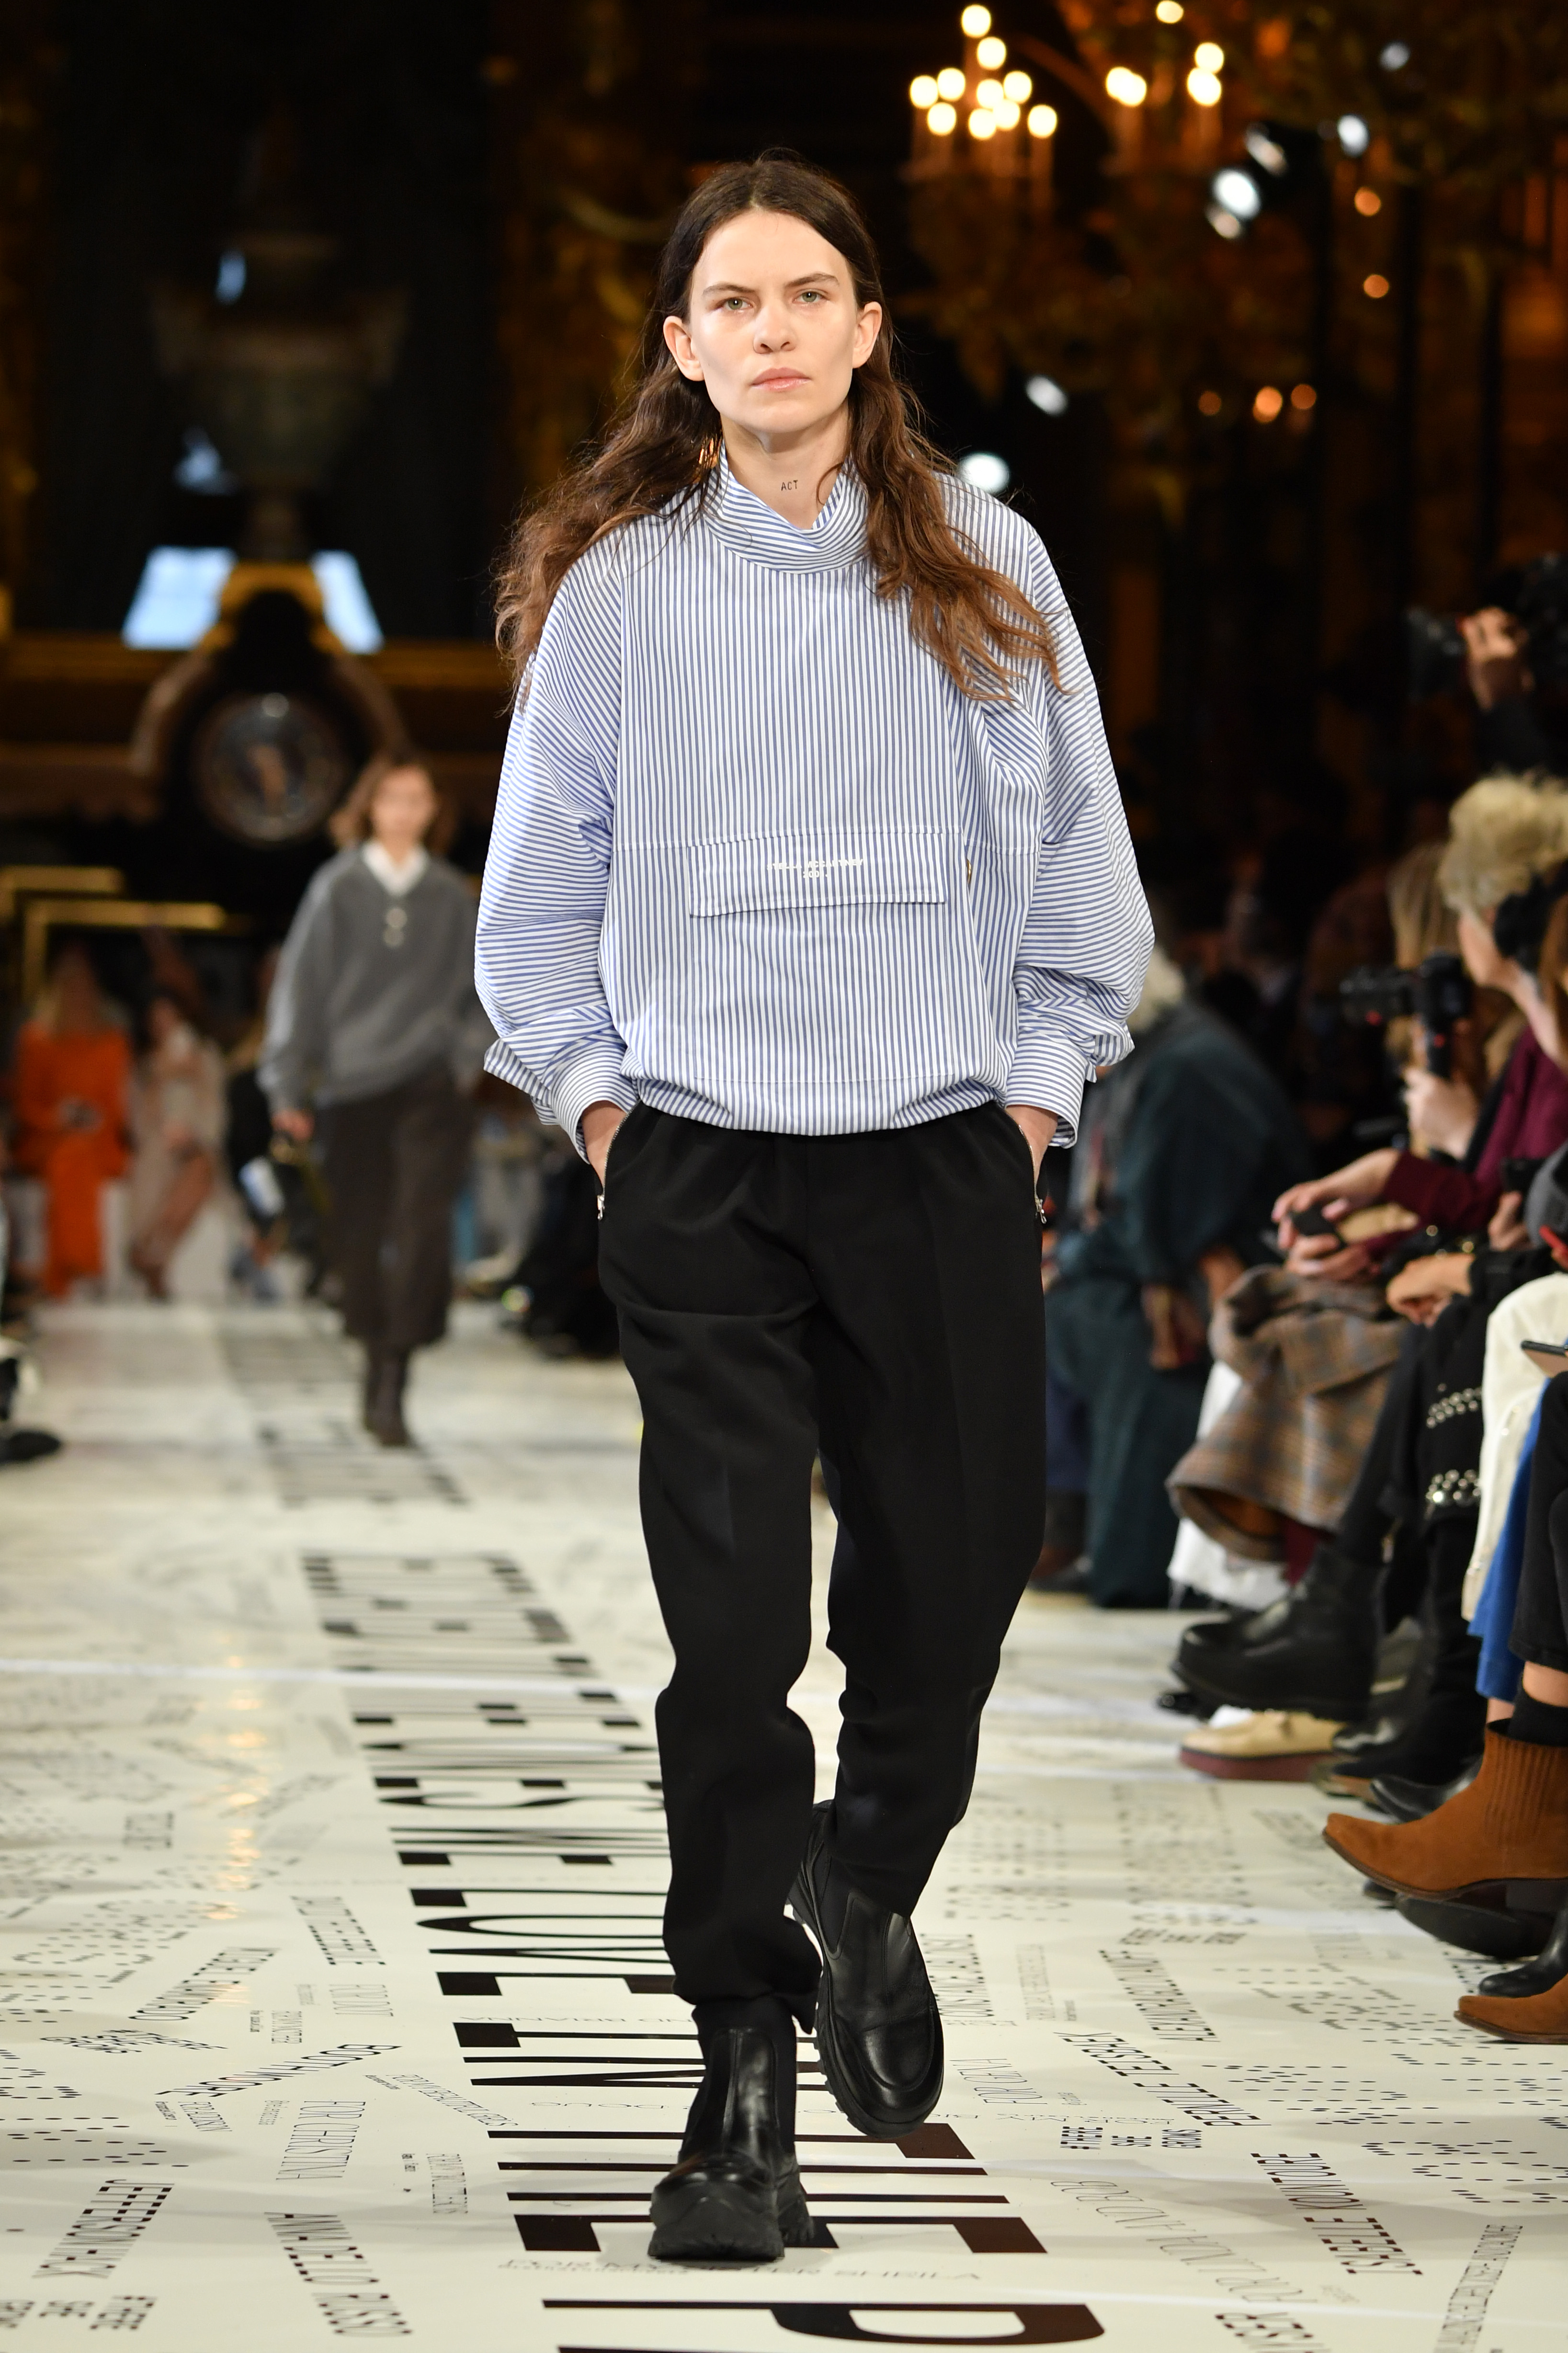 Eliot "Coco" Sumner walks the runway on March 4, 2019 in Paris, France | Source: Getty Images